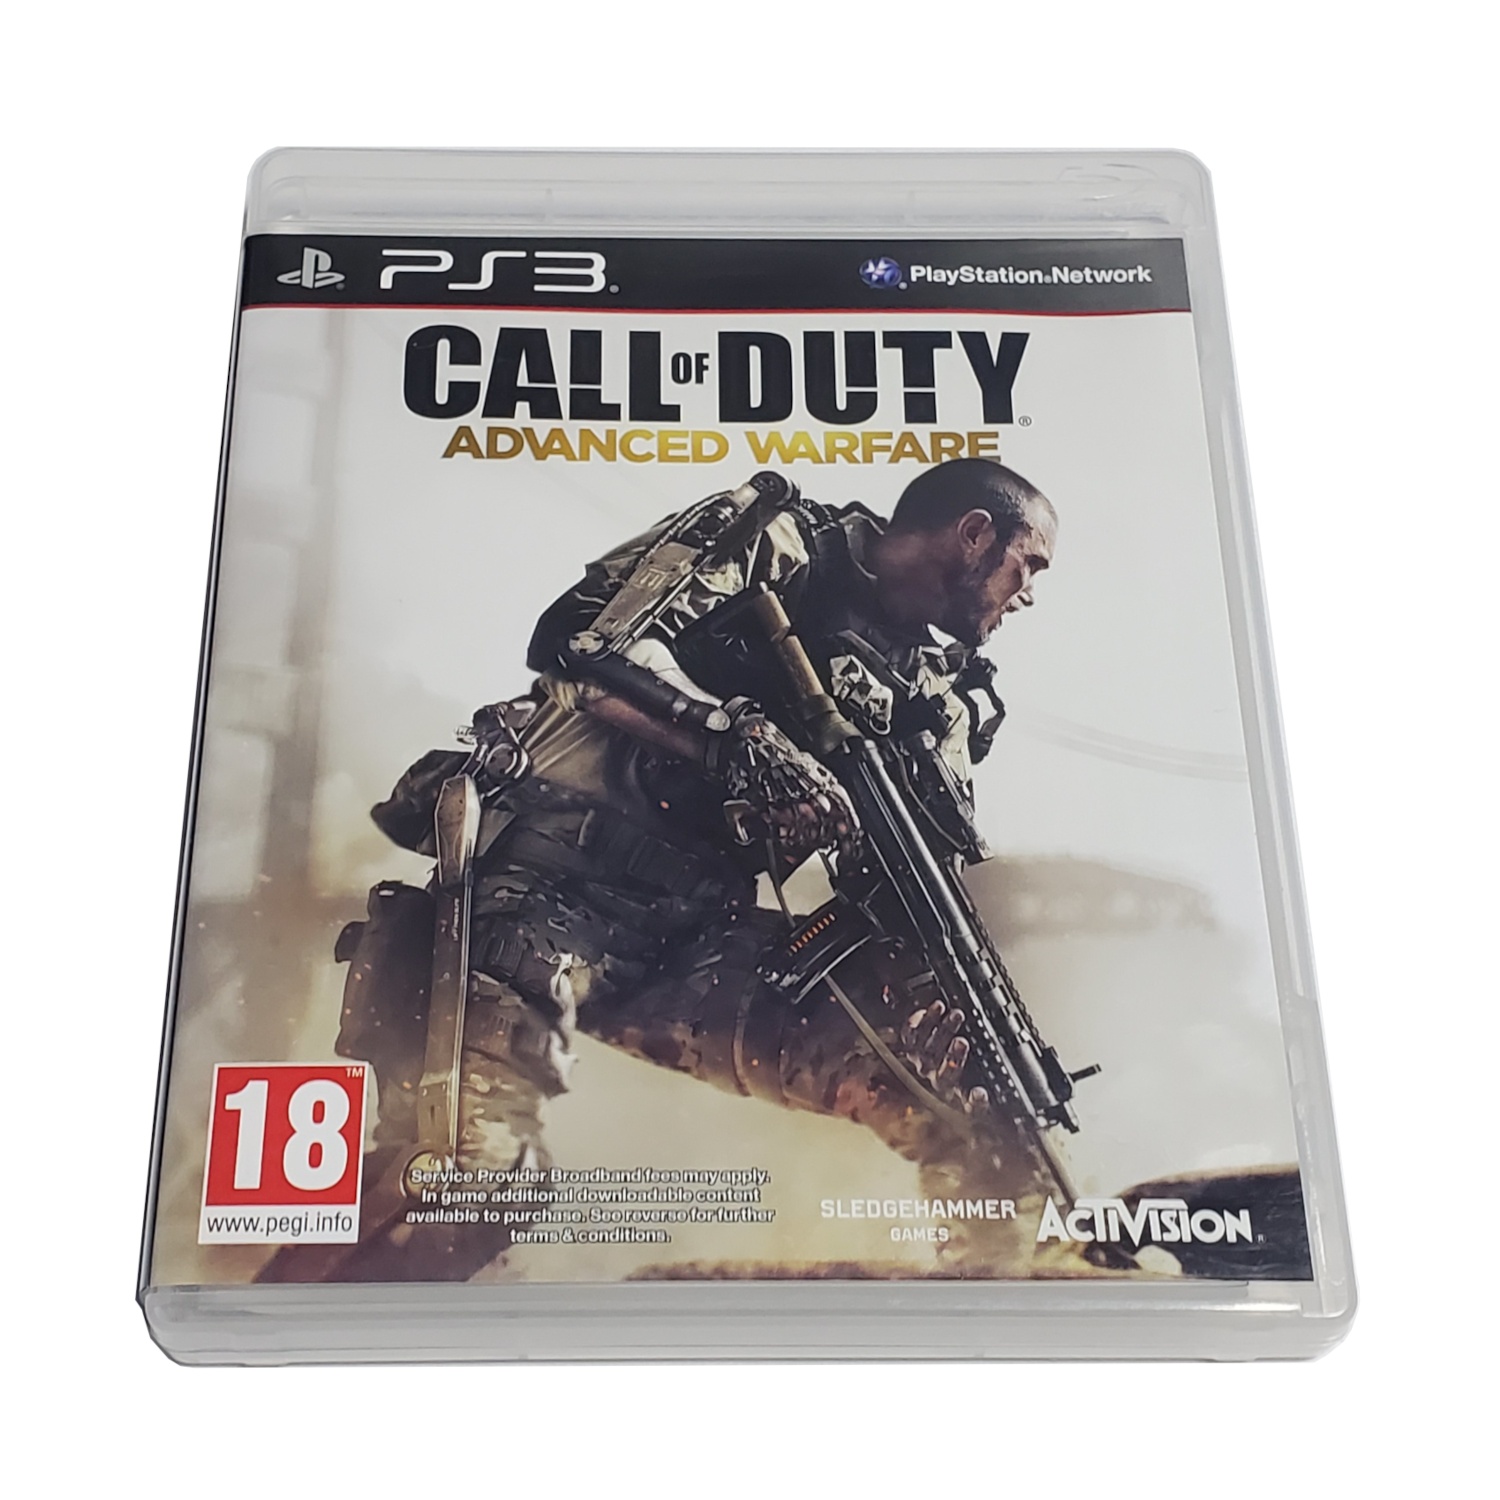 Call of Duty Advanced Warfare PS3 - Gripping Story, Adrenaline-Pumping Gameplay